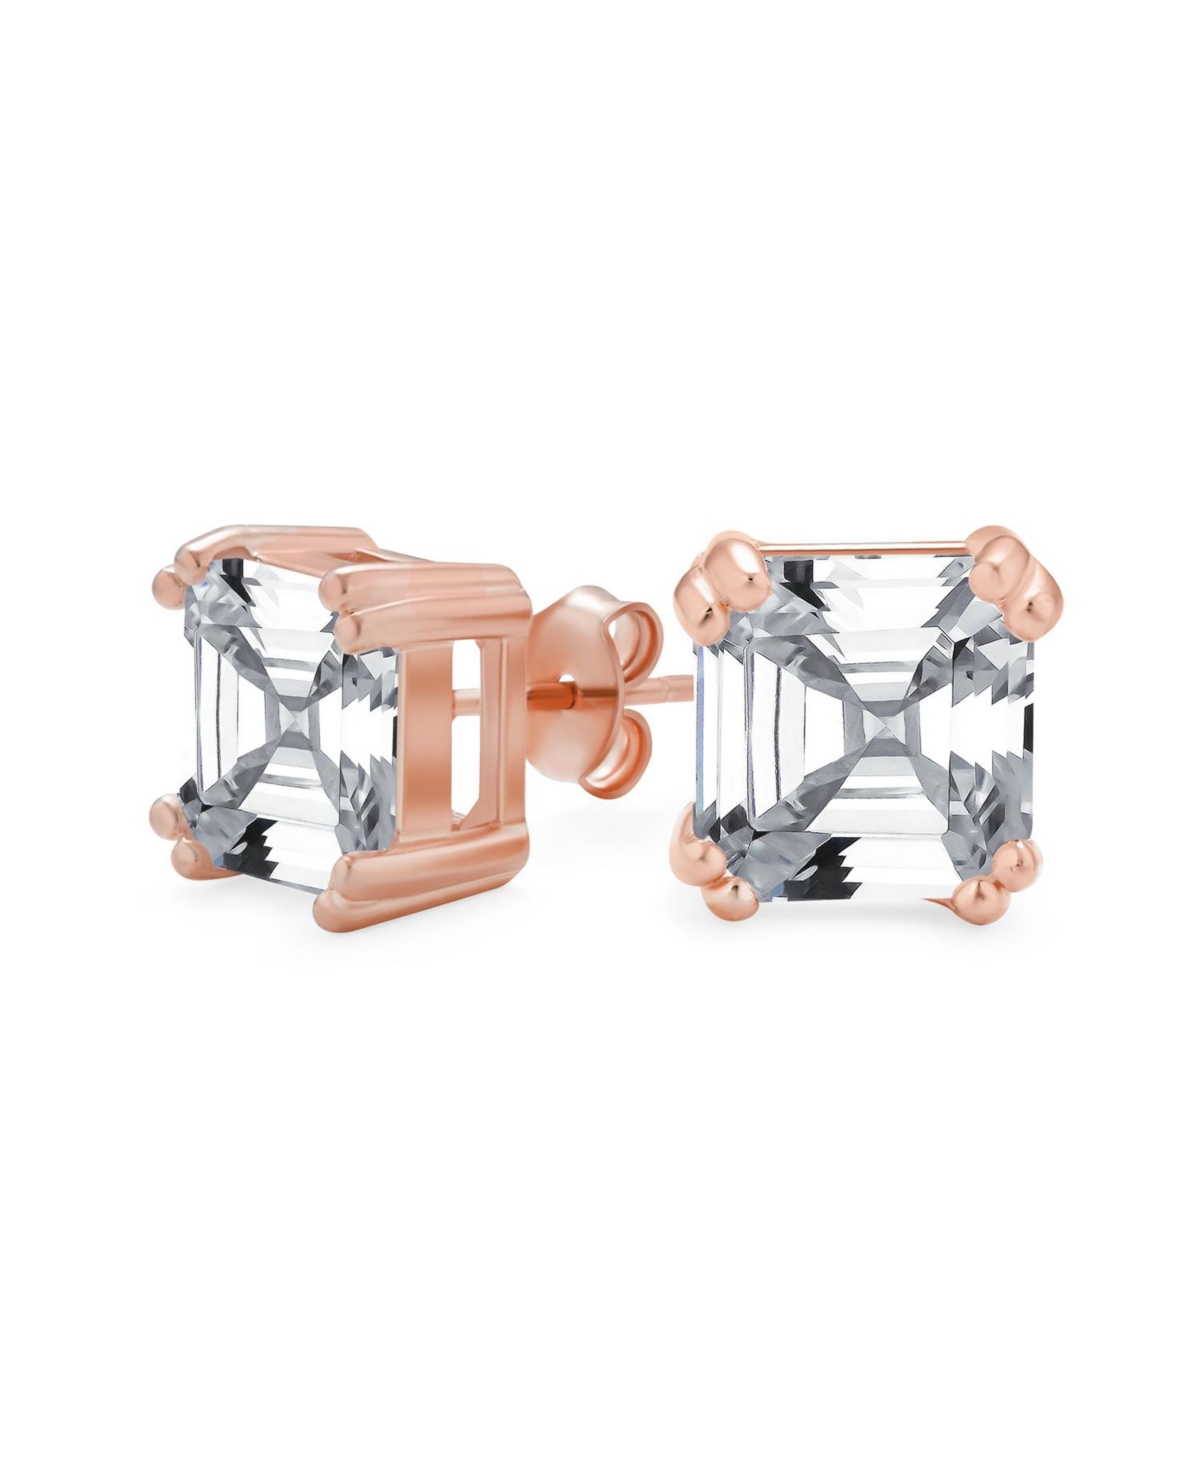 2CT Cubic Zirconia Solitaire Square Aaa Cz Asscher Cut Stud Earrings For Women Rose Gold Plated .925 Sterling Silver - Rose